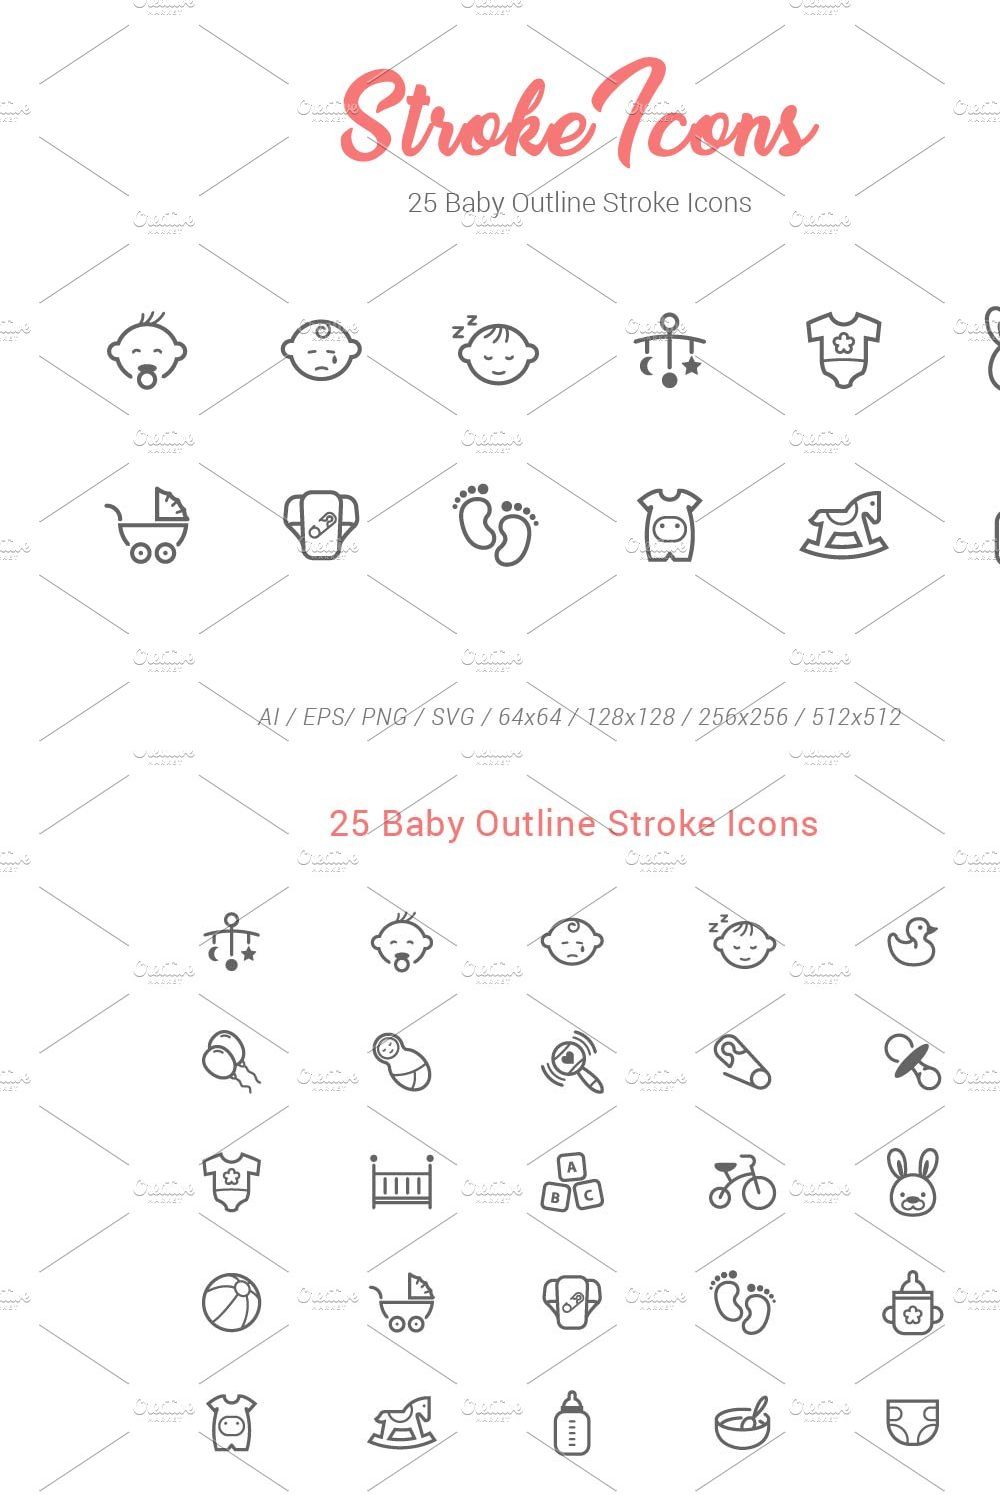 25 Baby Outline Stroke Icons pinterest preview image.